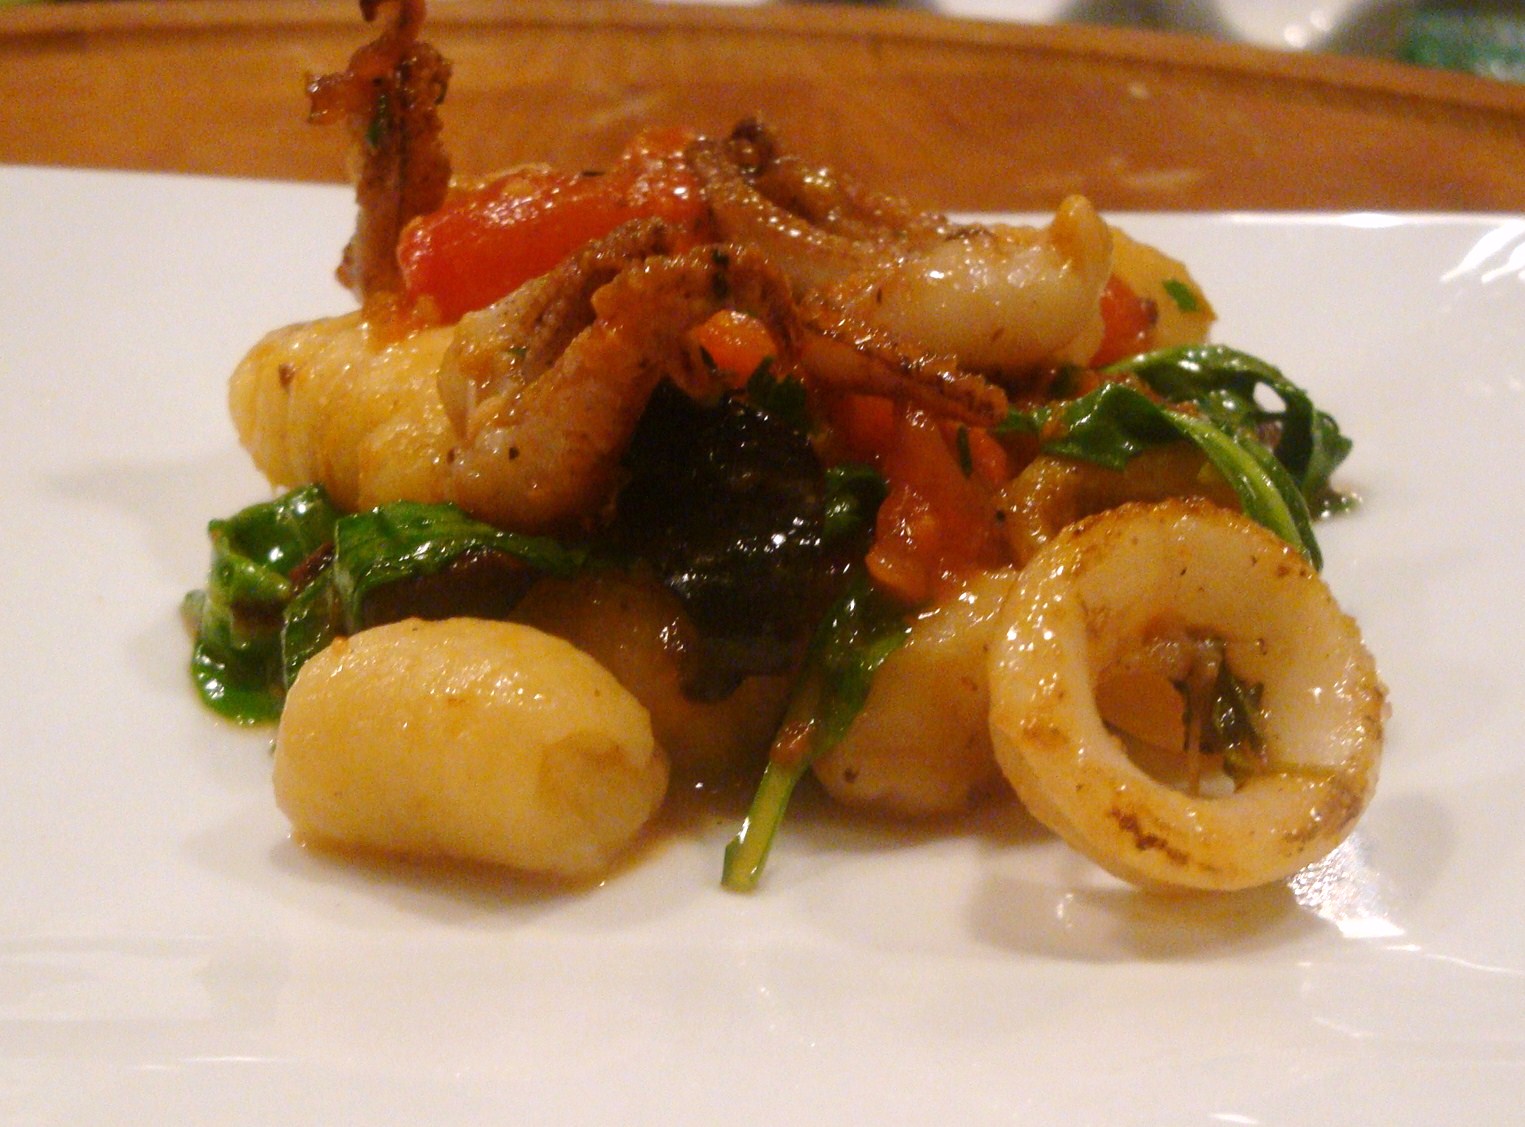 Cavatelli with Seared Squid, Oven-Roasted Tomatoes, Baby Arugula and Black Olives